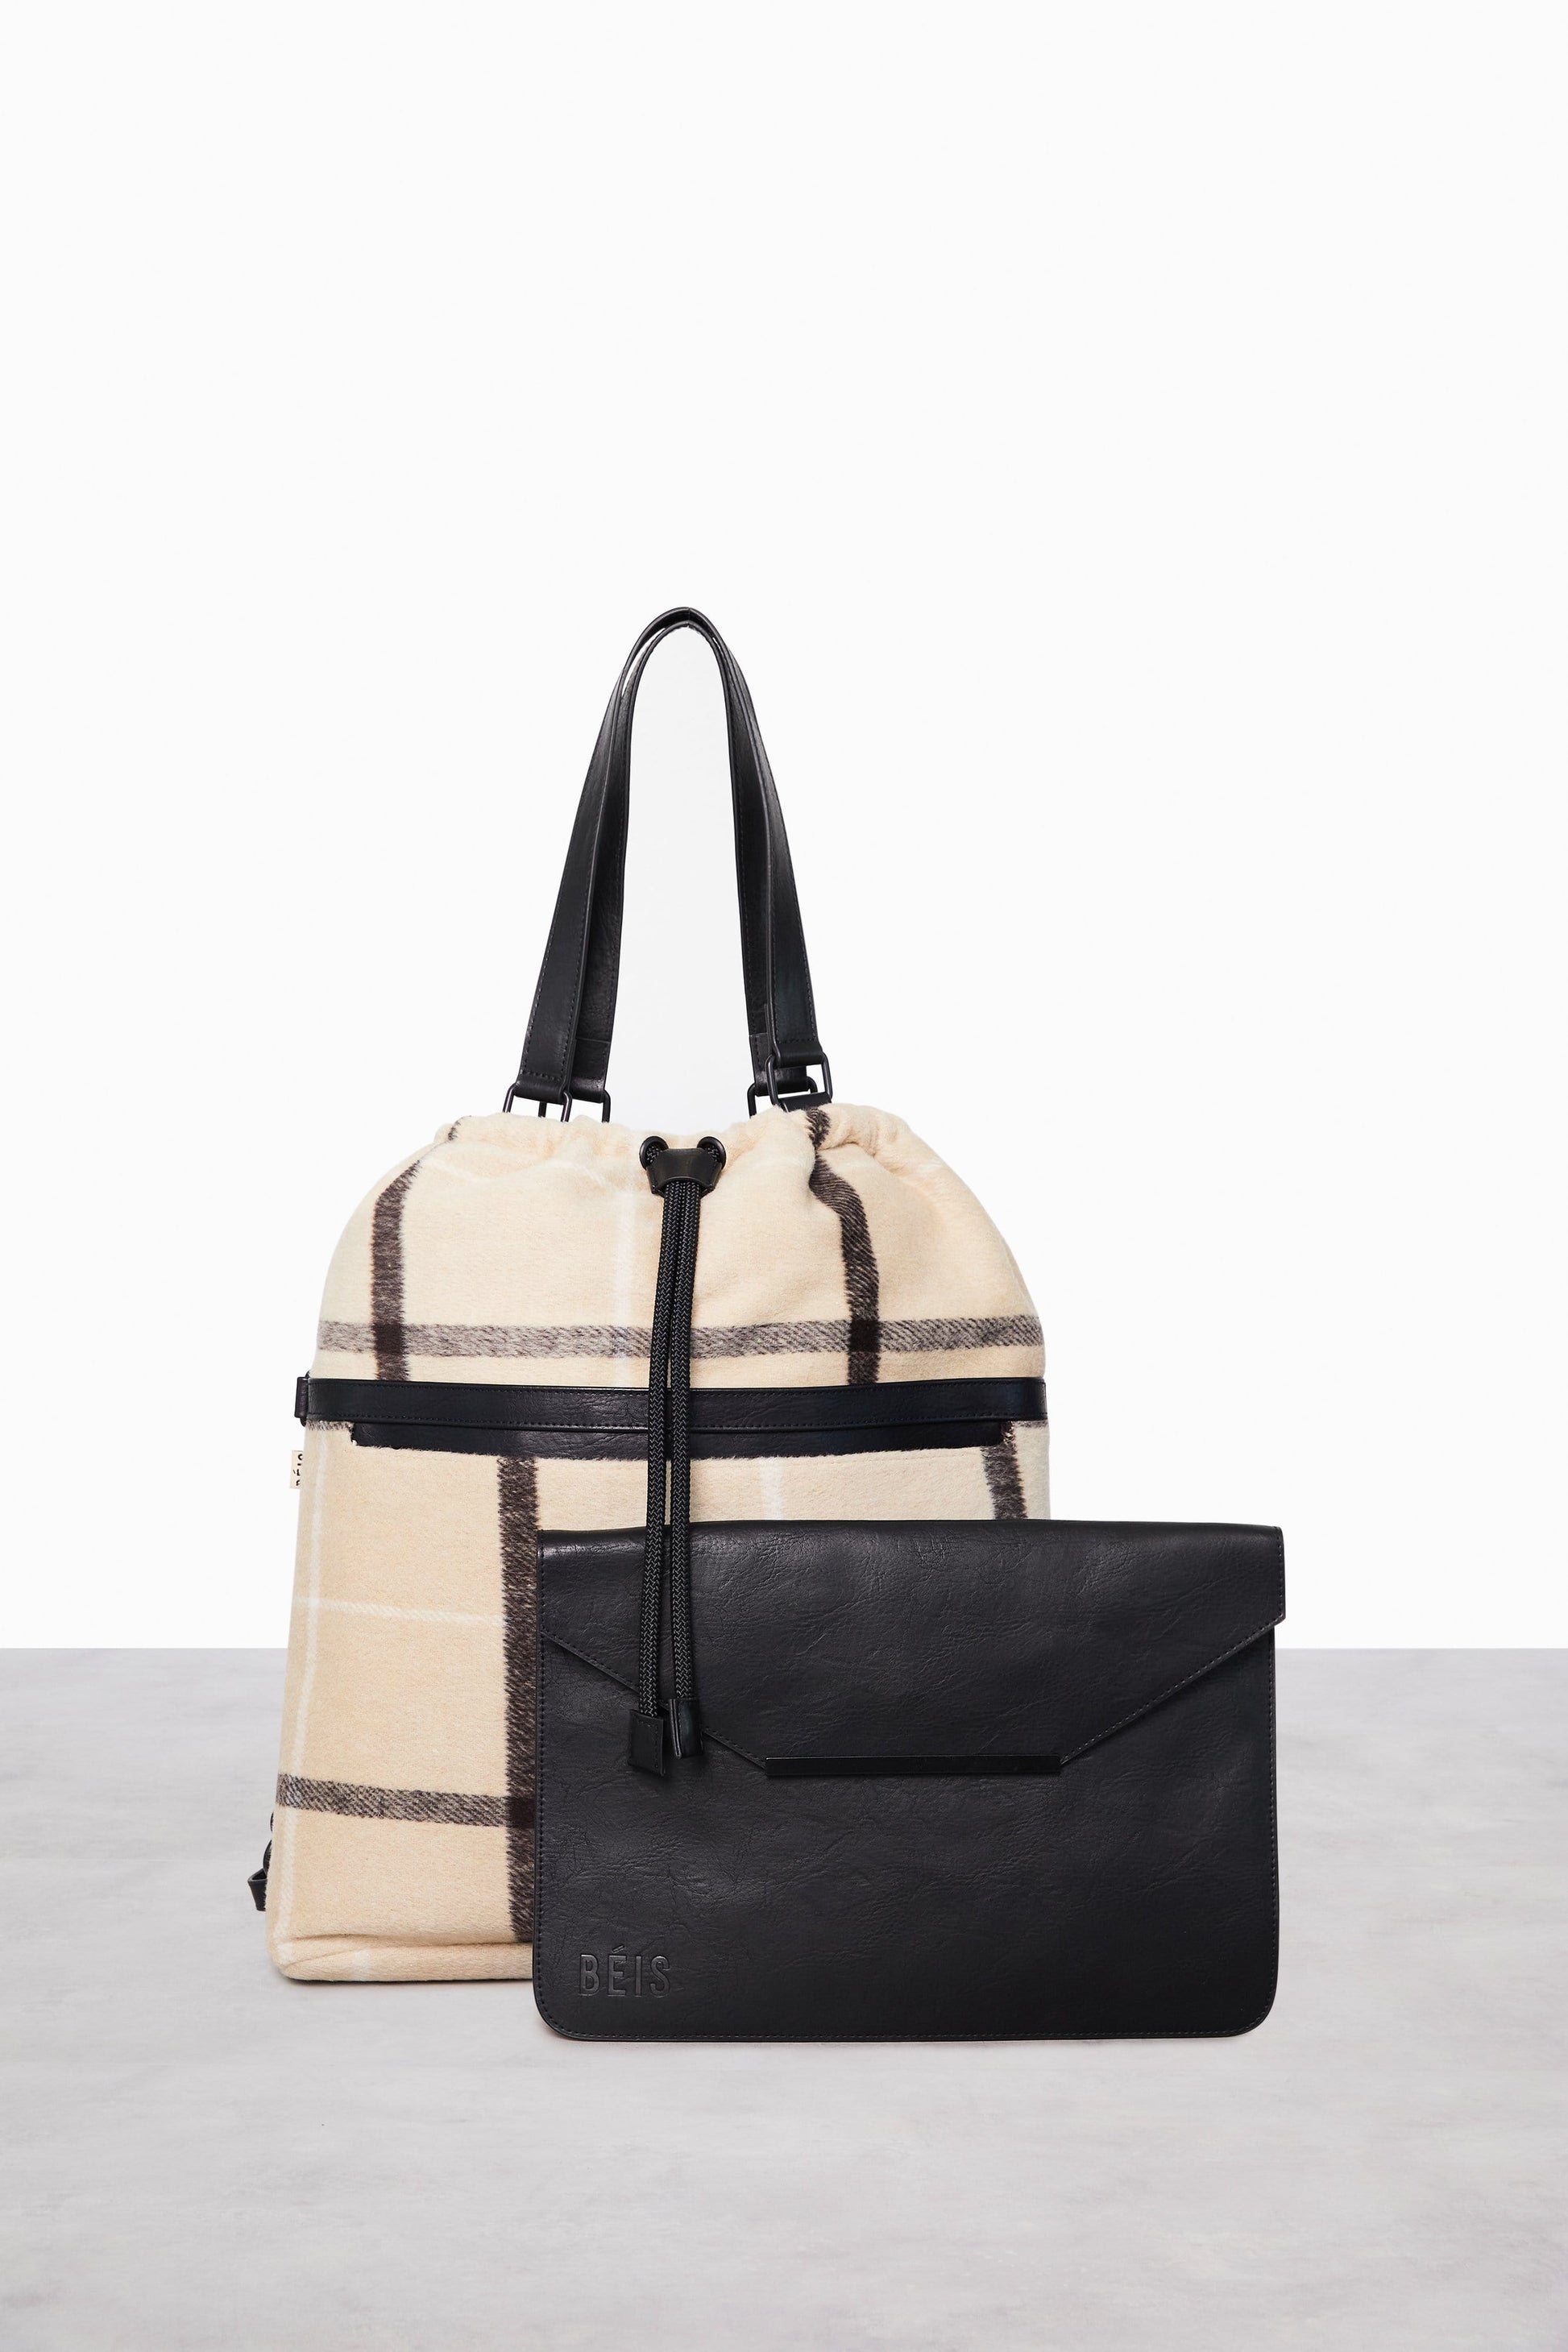 Messenger Tote in Plaid Front with Laptop Sleeve